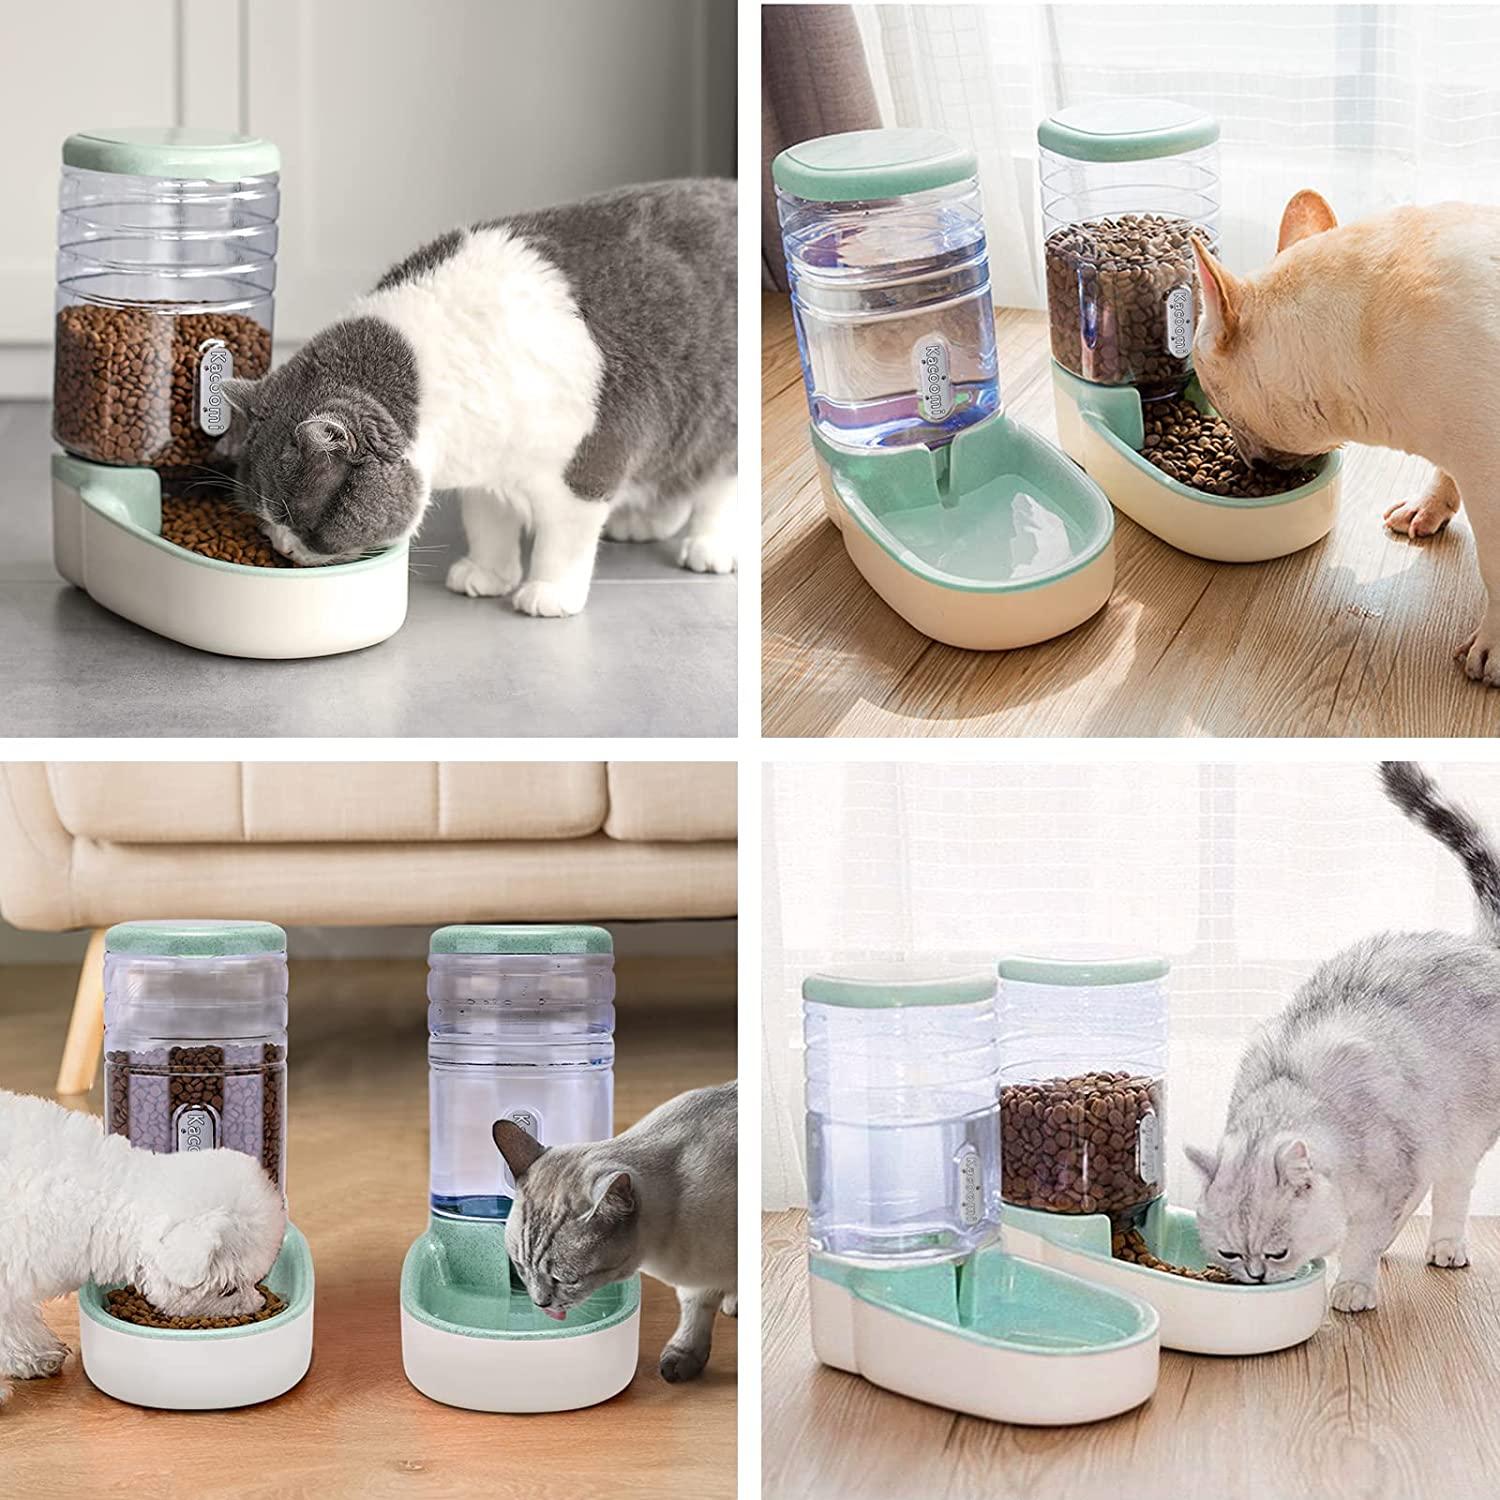 Super Design Multifunctional Automatic Feeders Dispenser Portion Control Water Dispenser Bowl for Dog and Cats